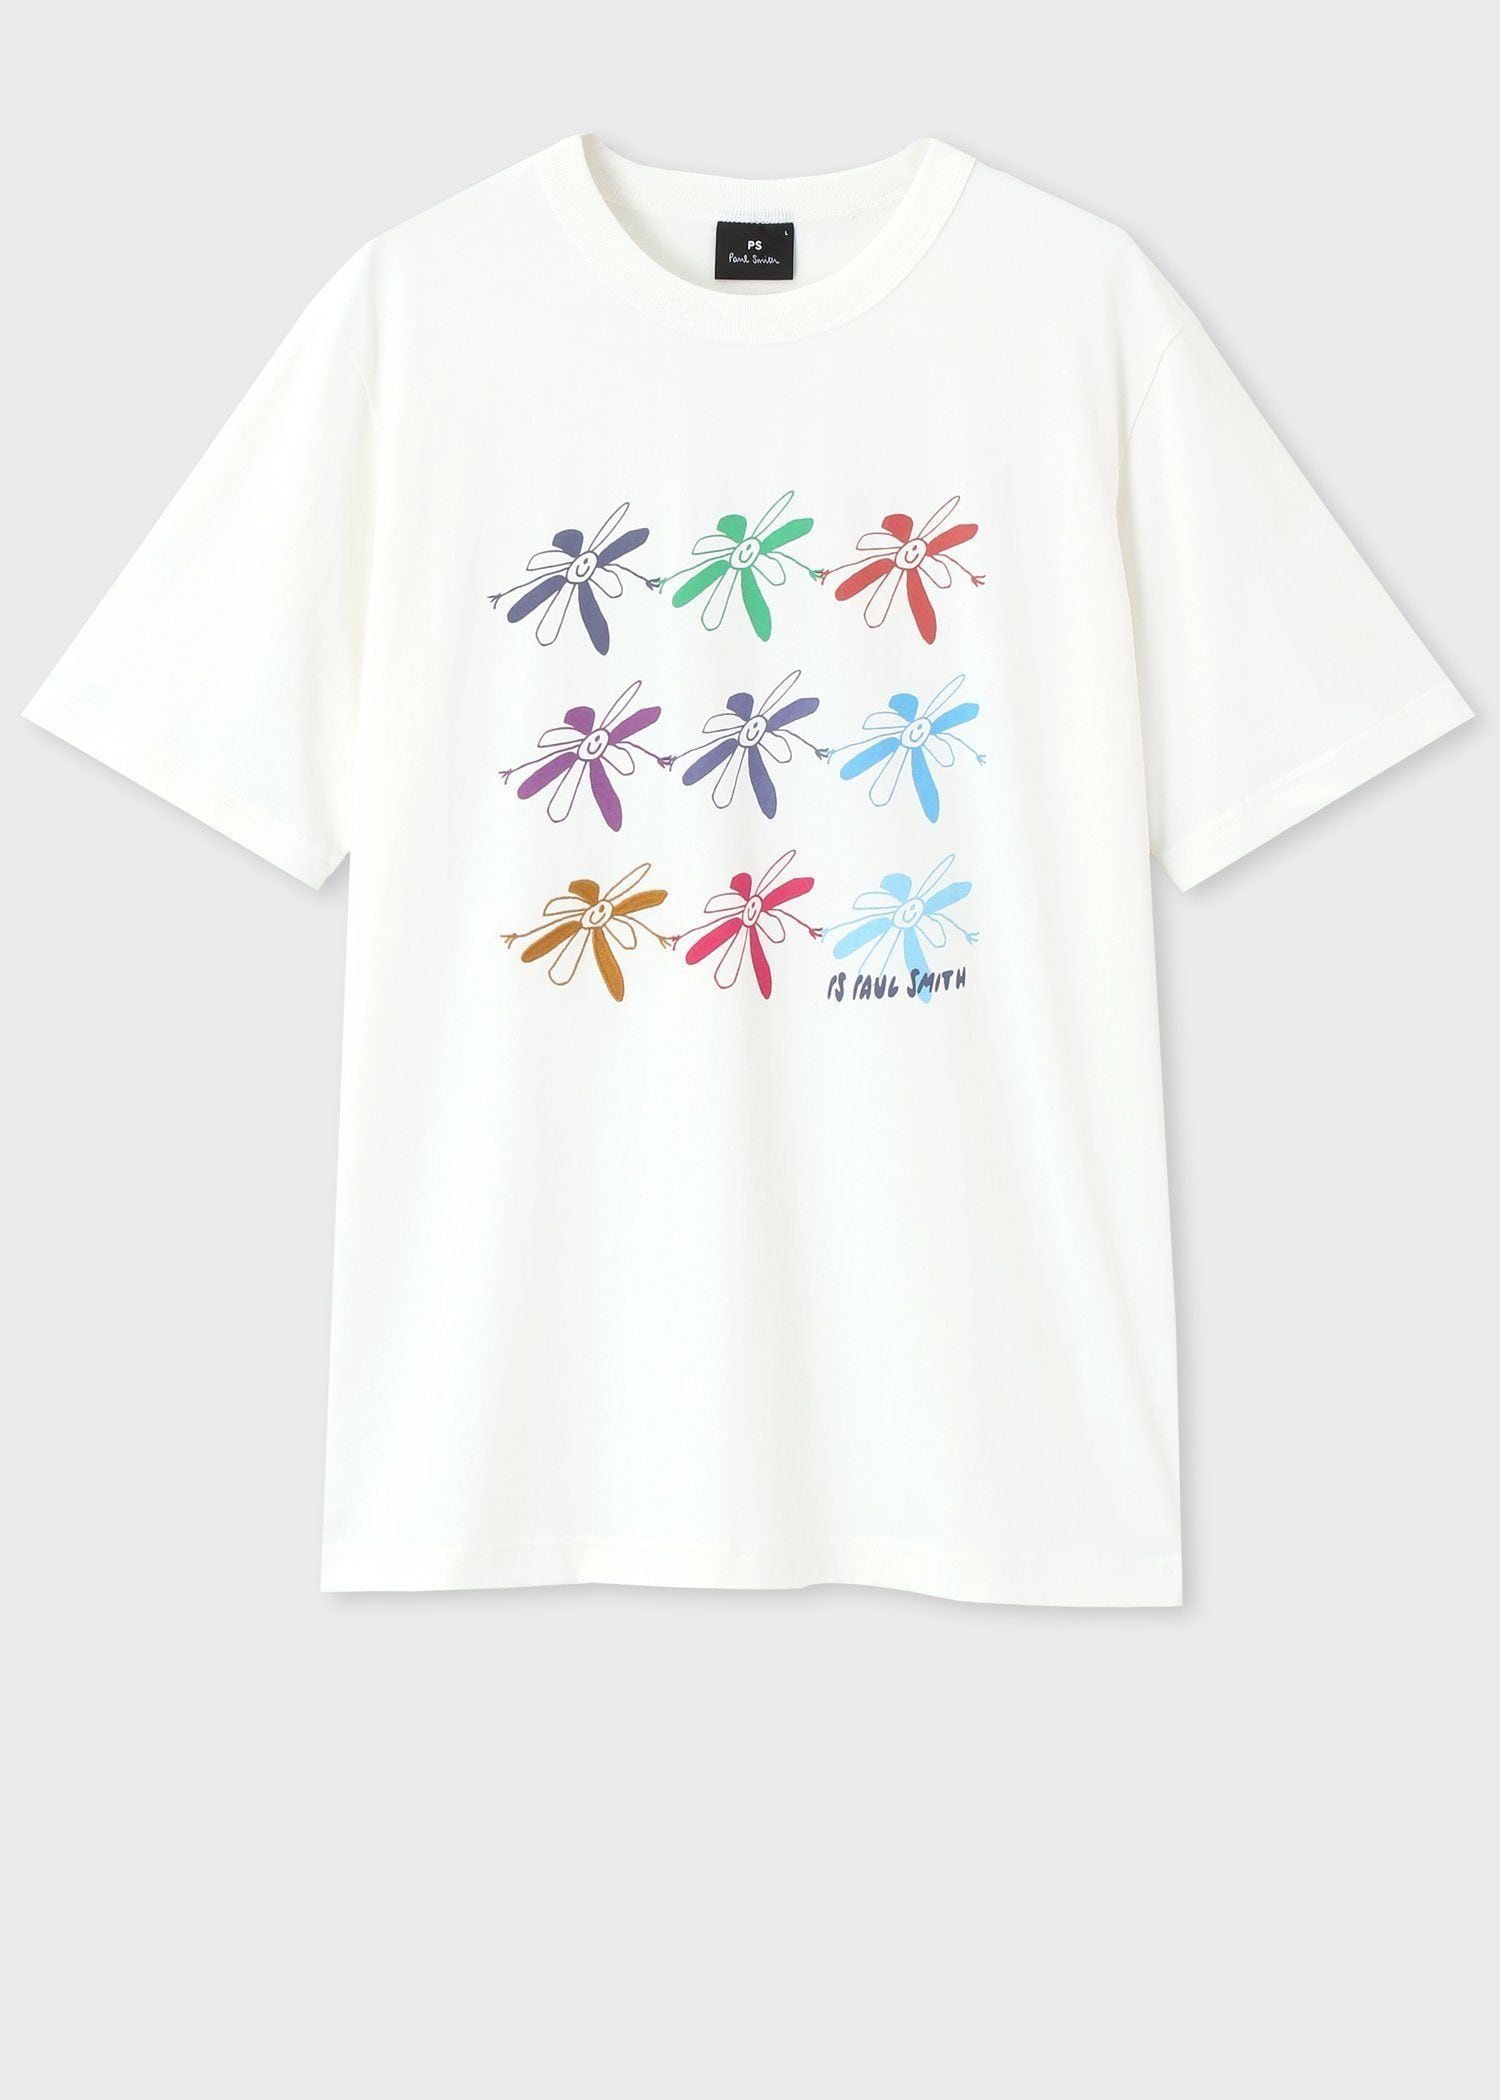 "Magnificent Obsessions" フラワー Tシャツ